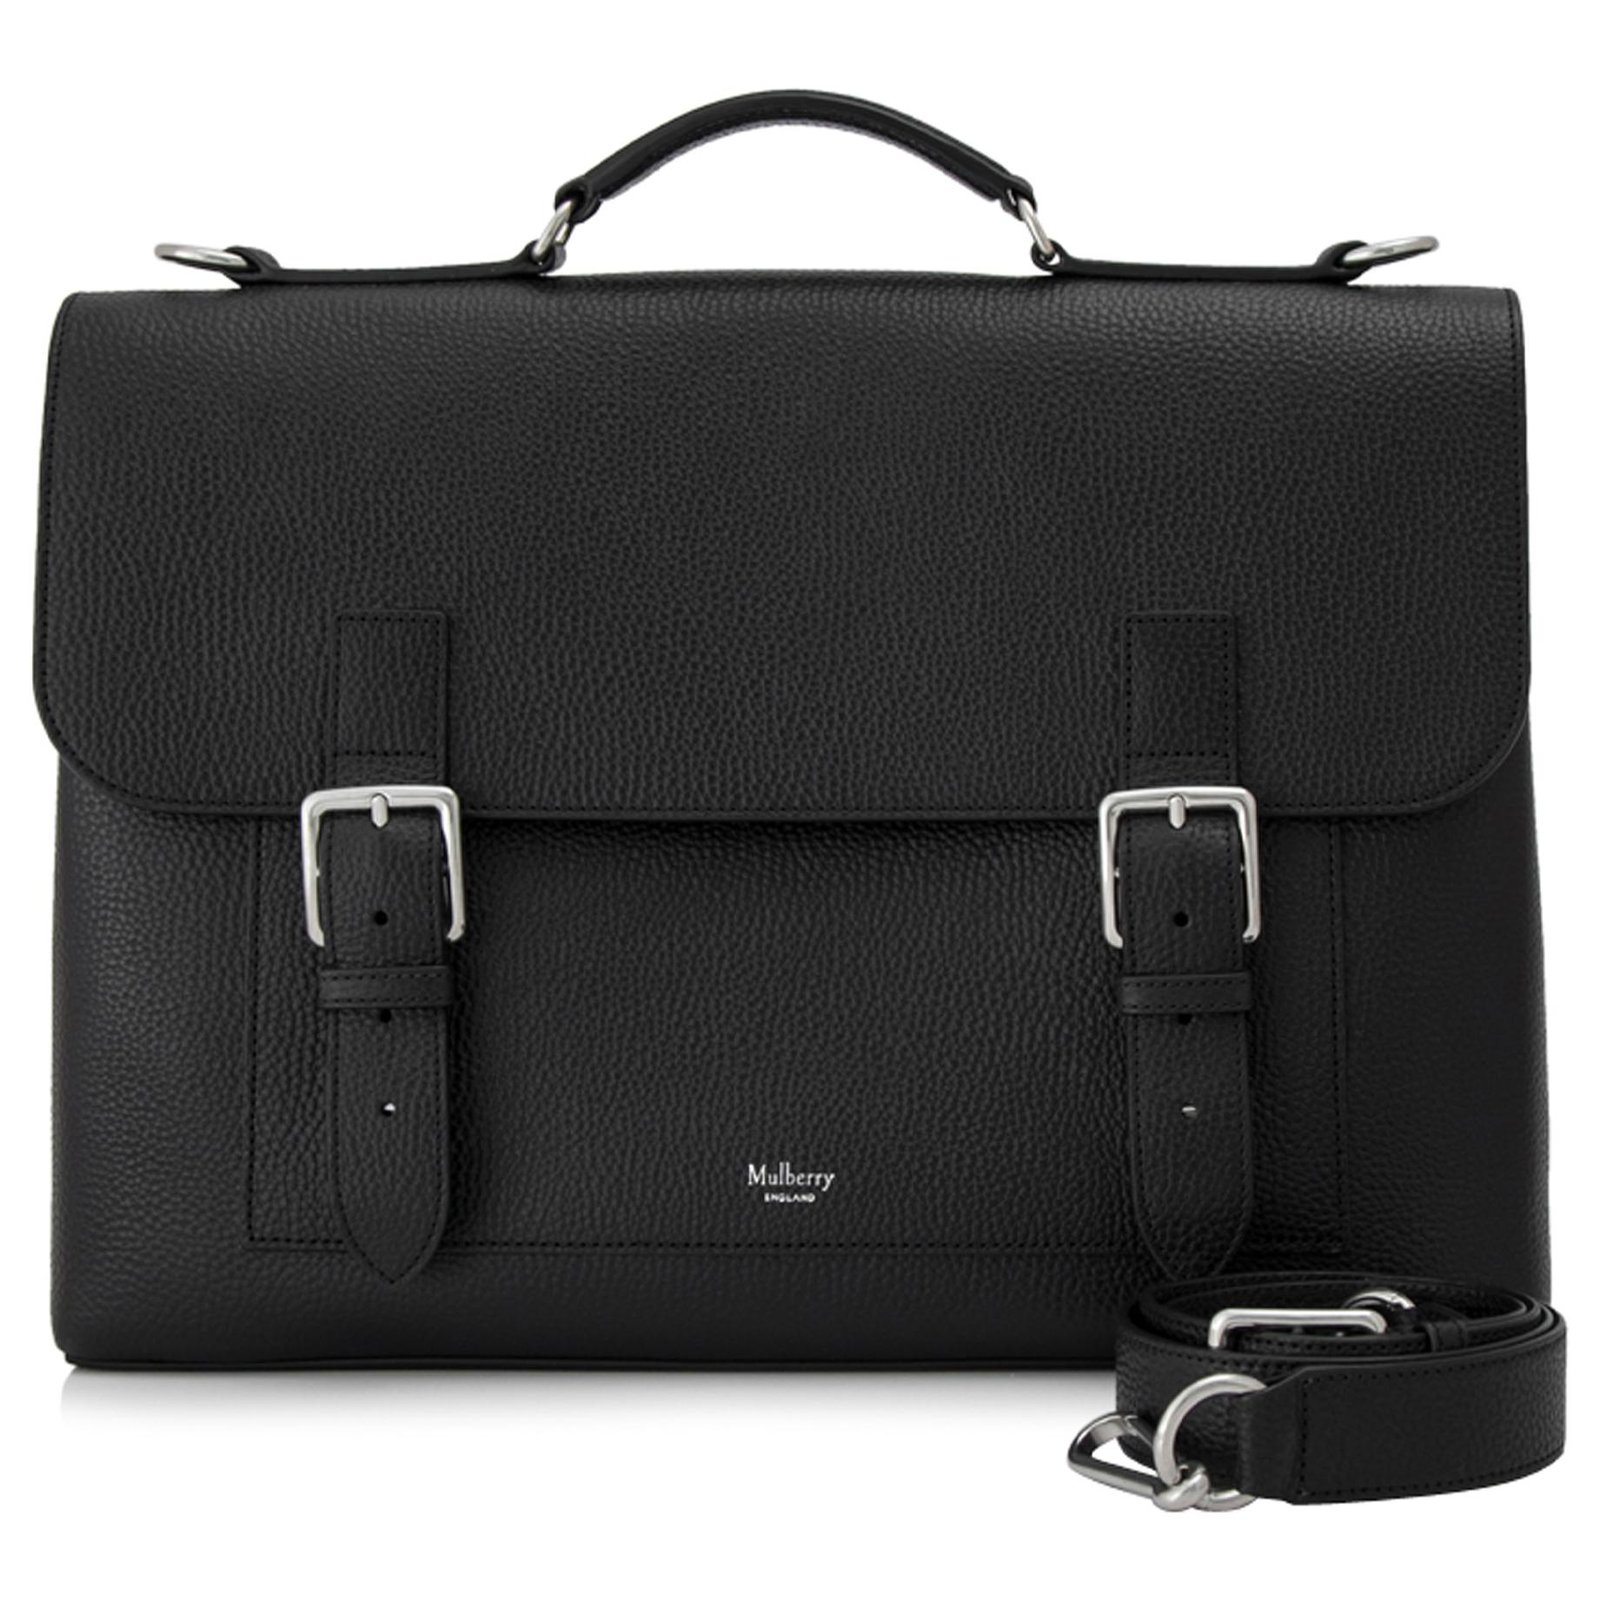 Mulberry Black Chiltern Leather Briefcase Pony-style calfskin ref ...